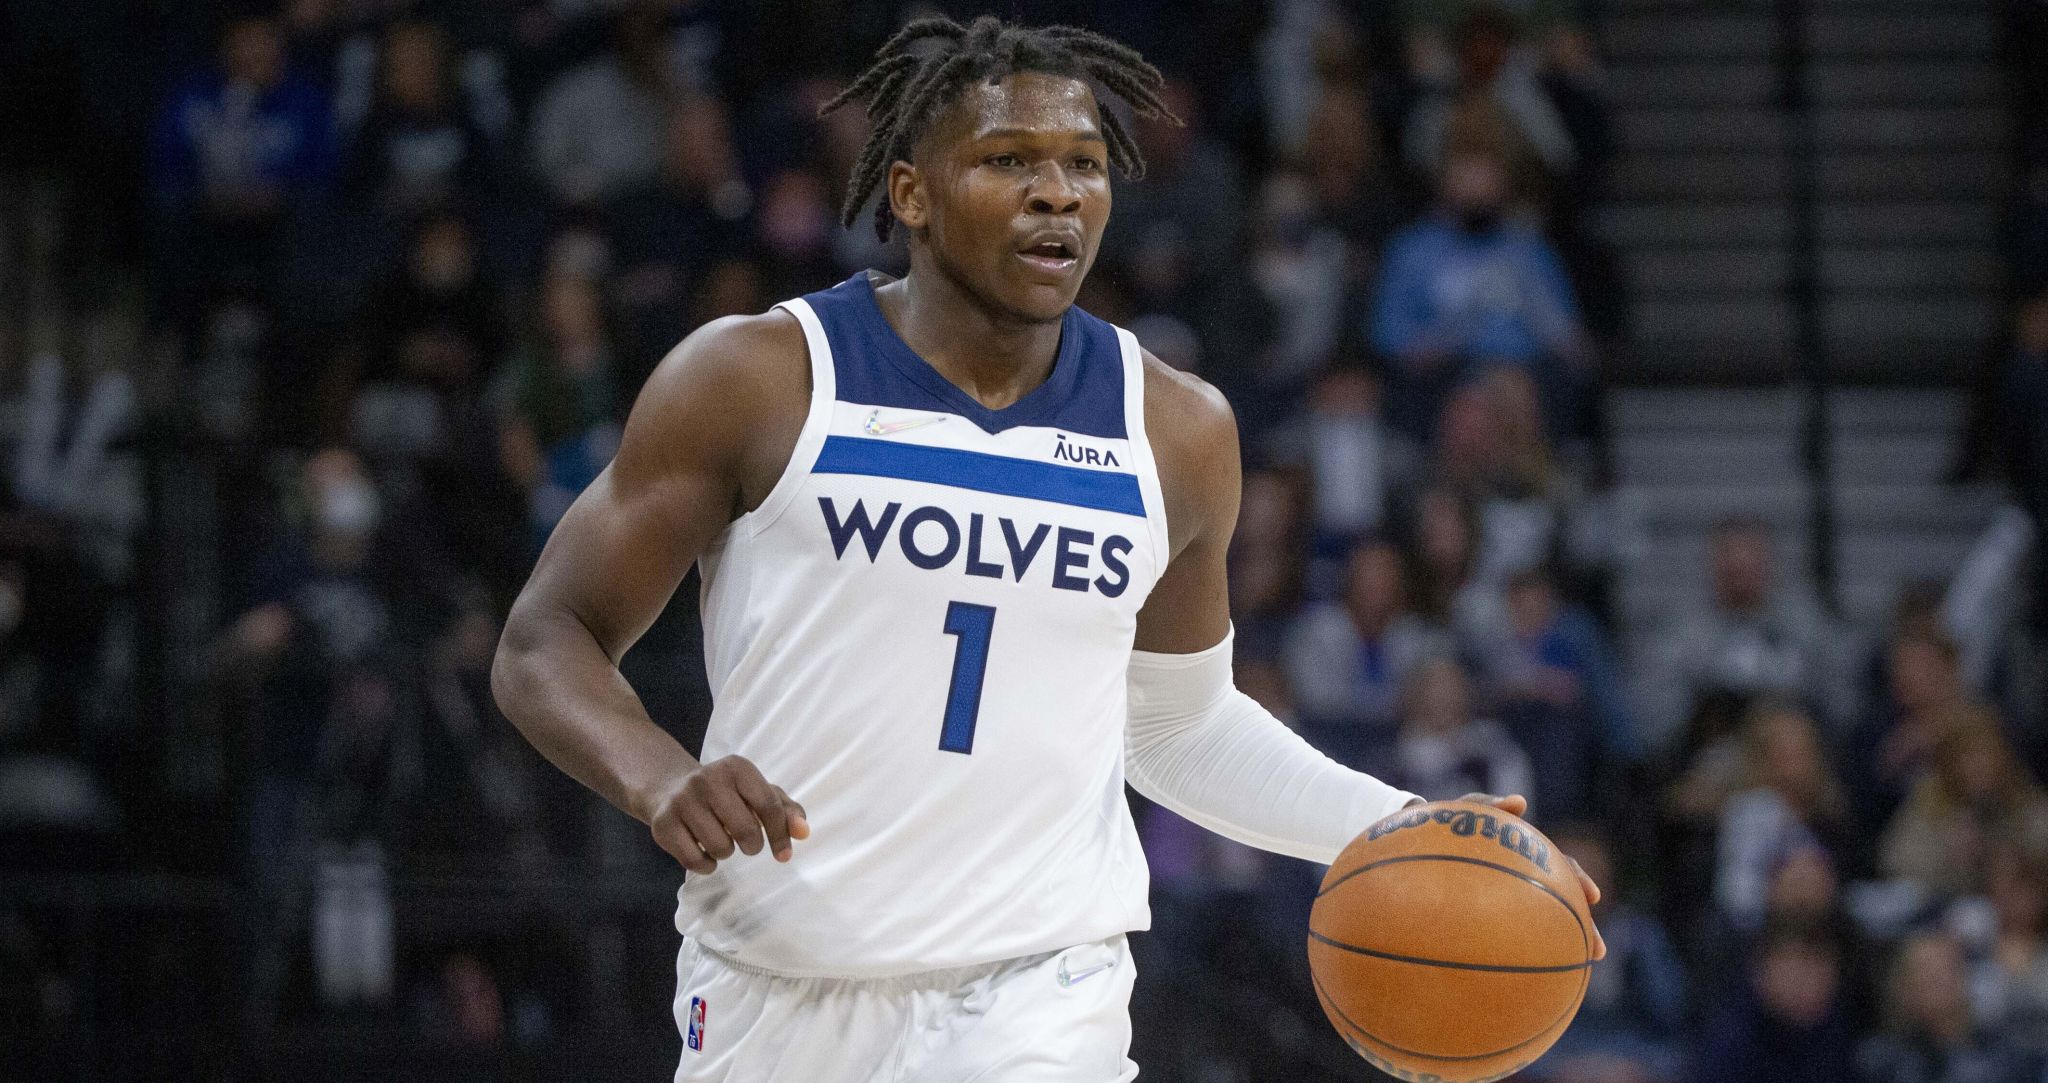 Among the many questions of the coming Wolves' season, one of the biggest  will be the maturation of Anthony Edwards both on and off the court